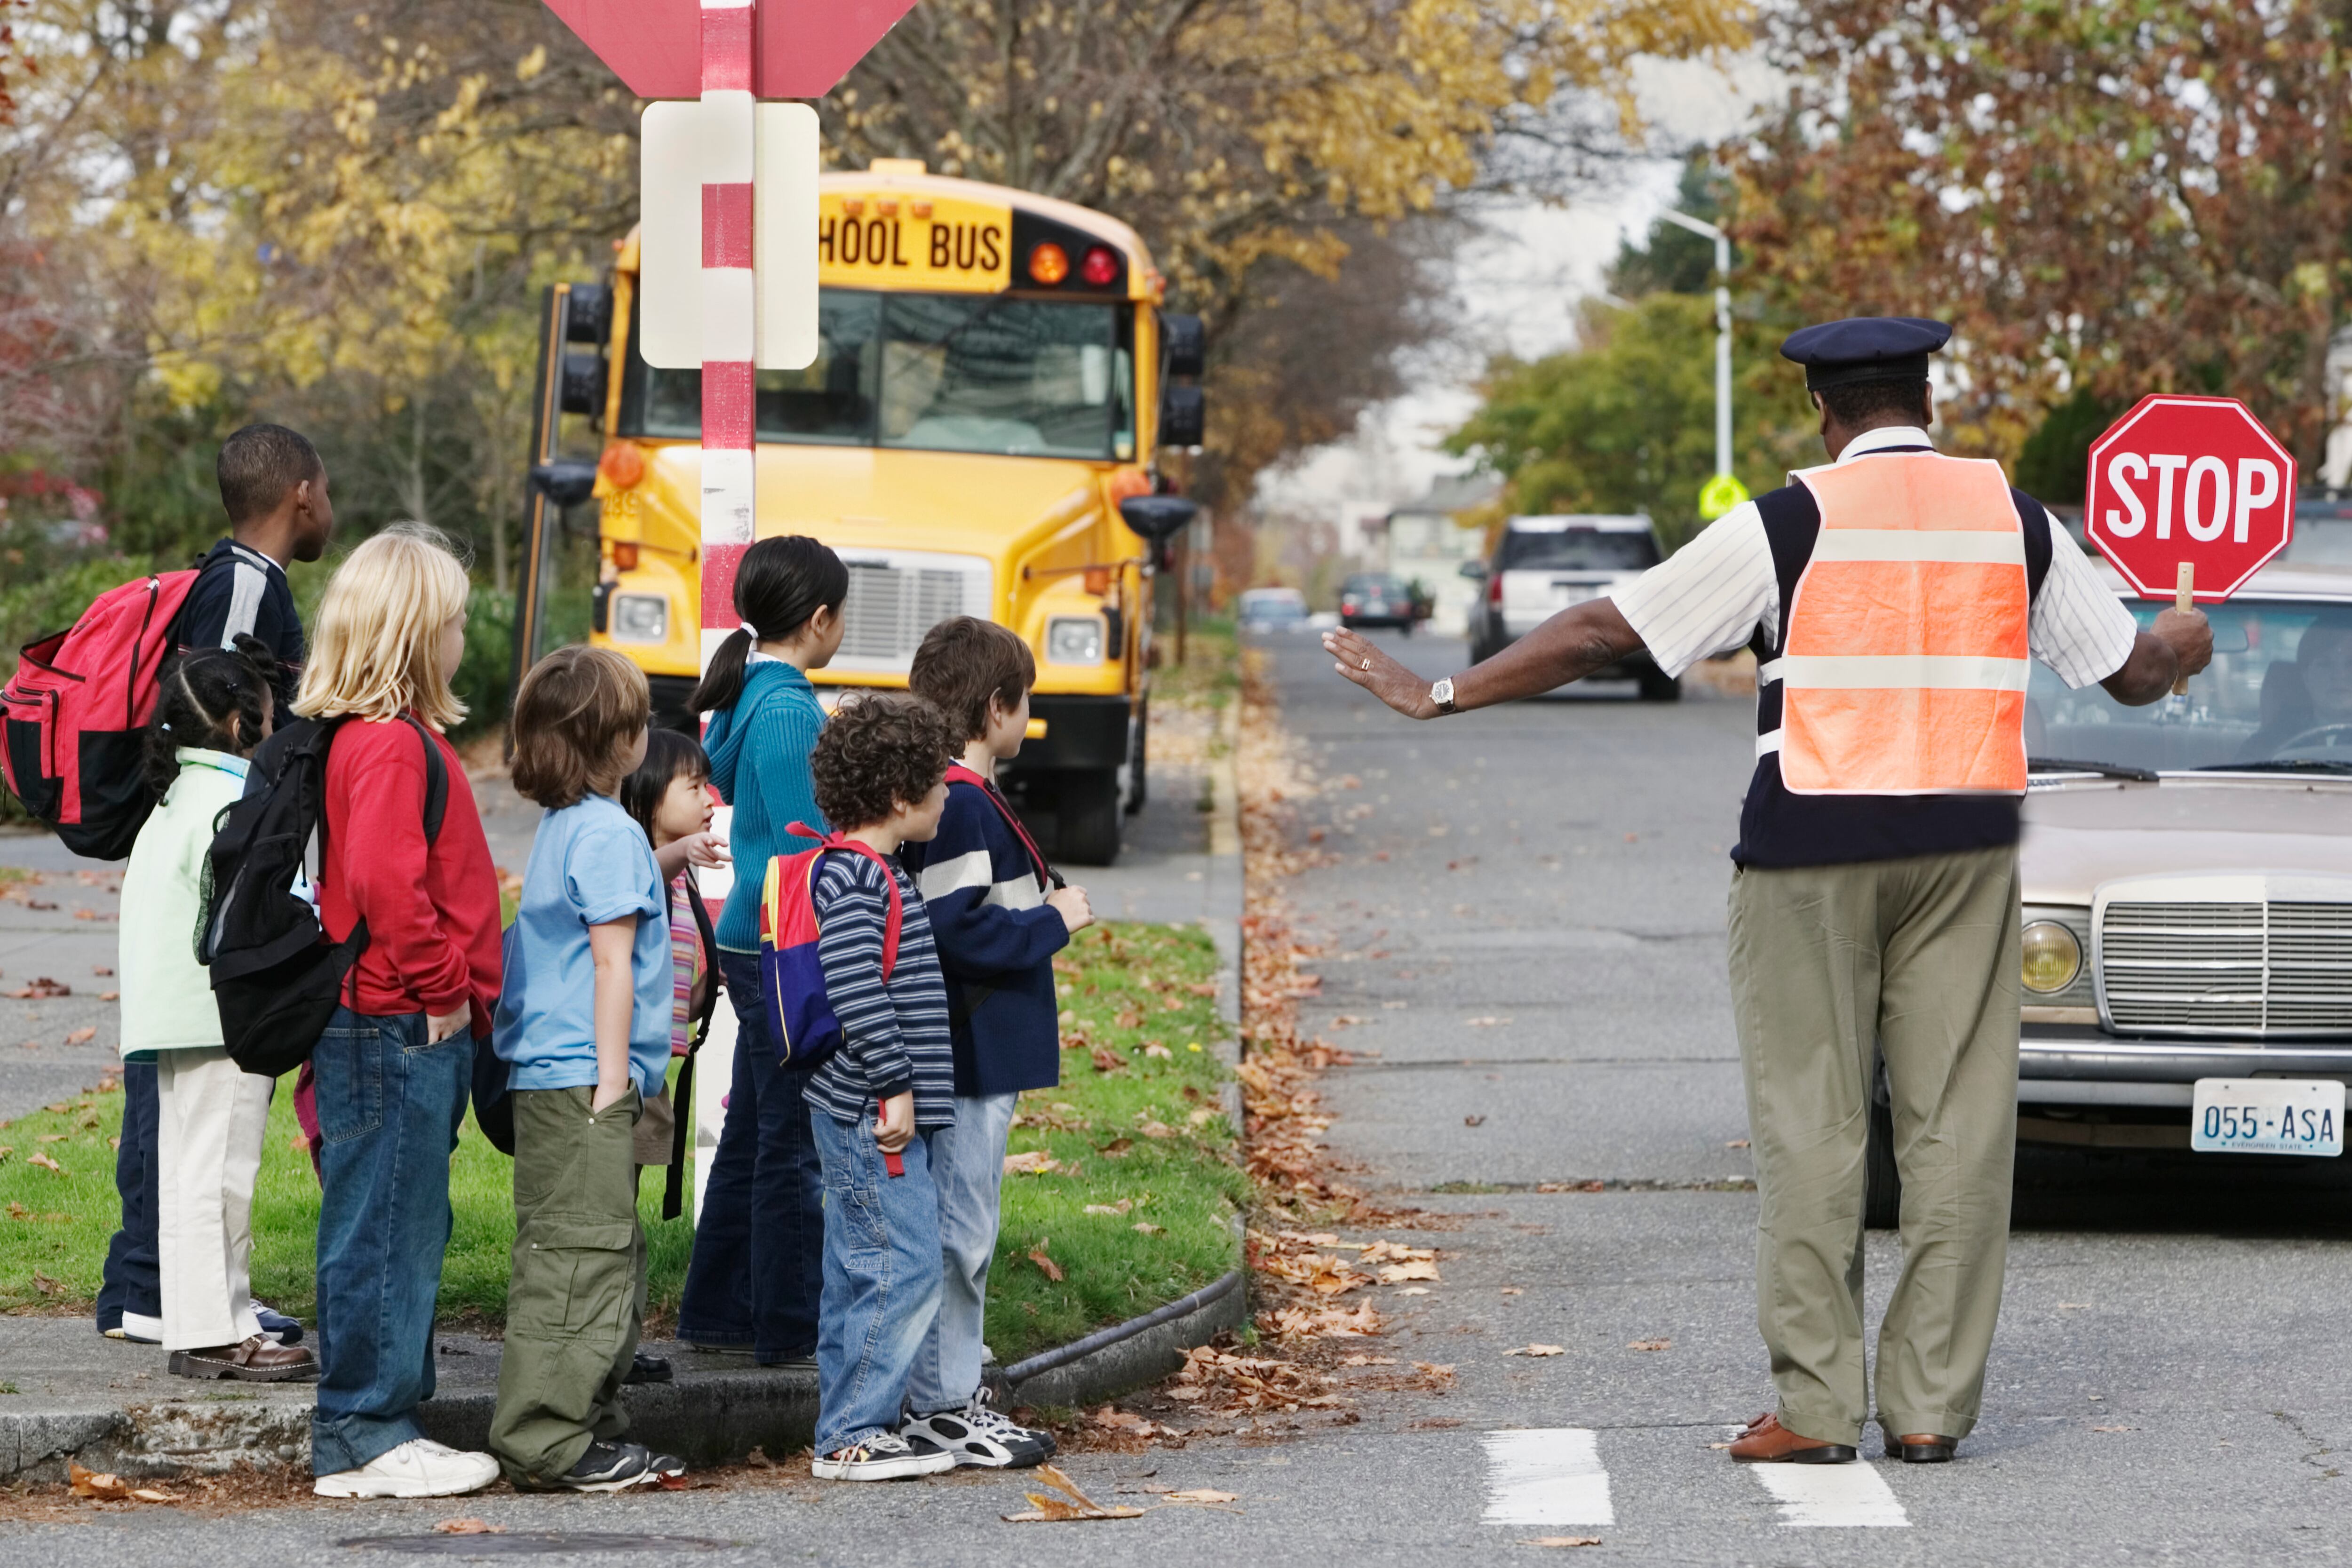 A man holds a stop sign and keeps students back from the street with a school bus in the background